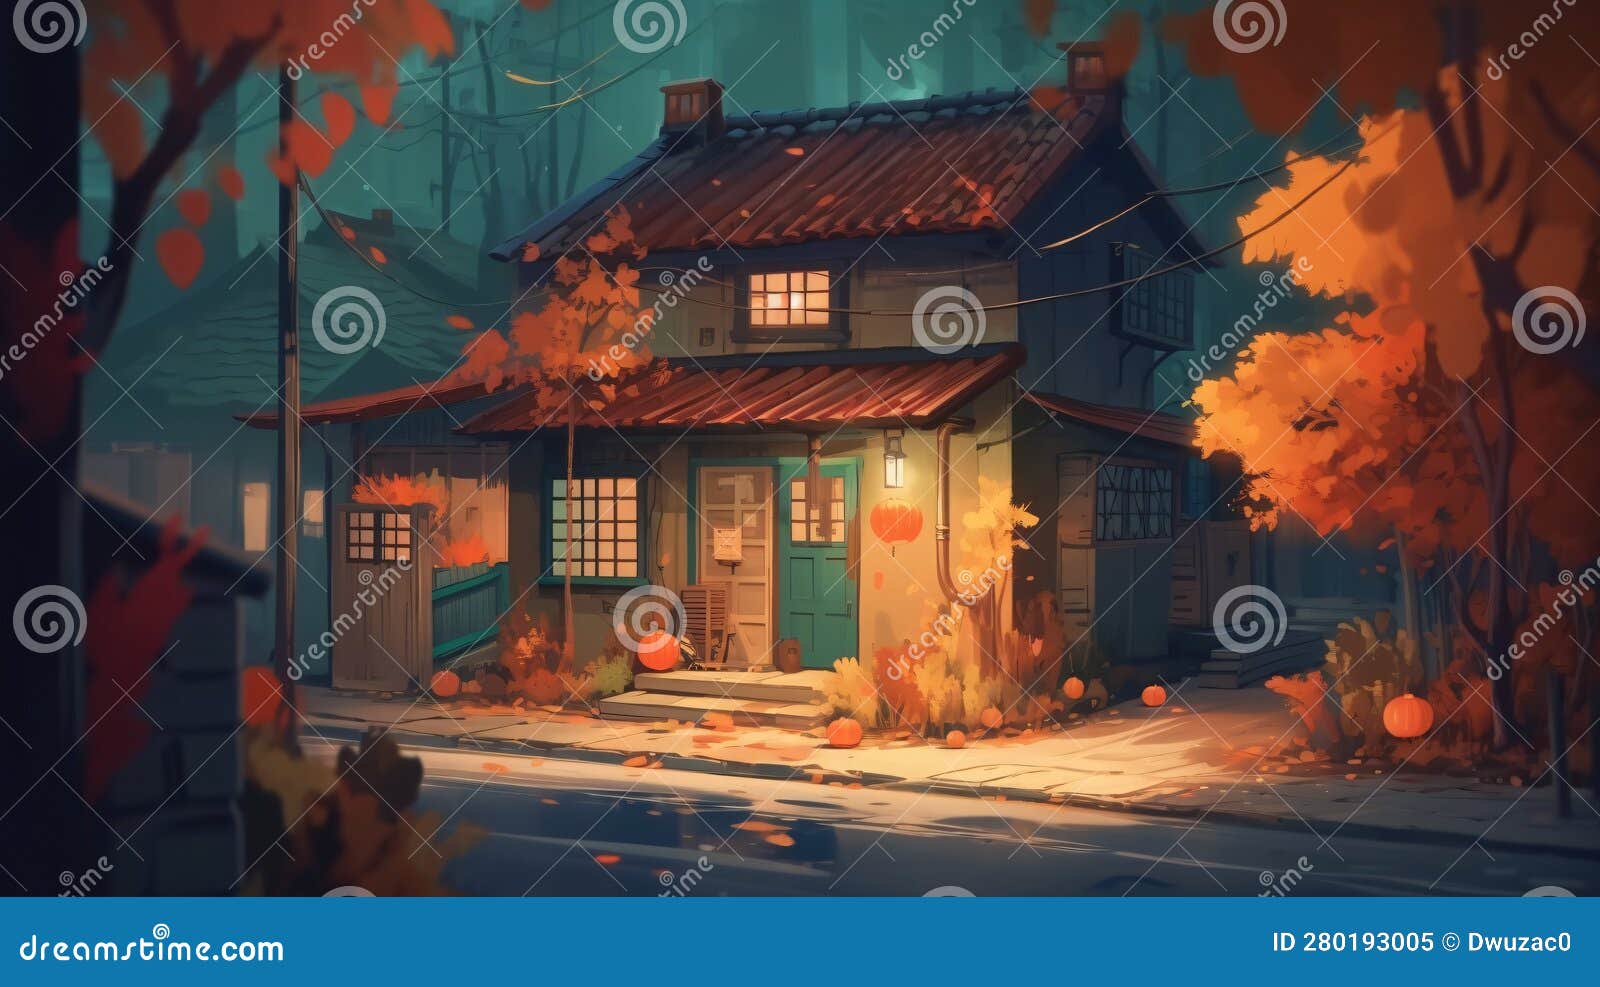 HD anime house wallpapers | Peakpx